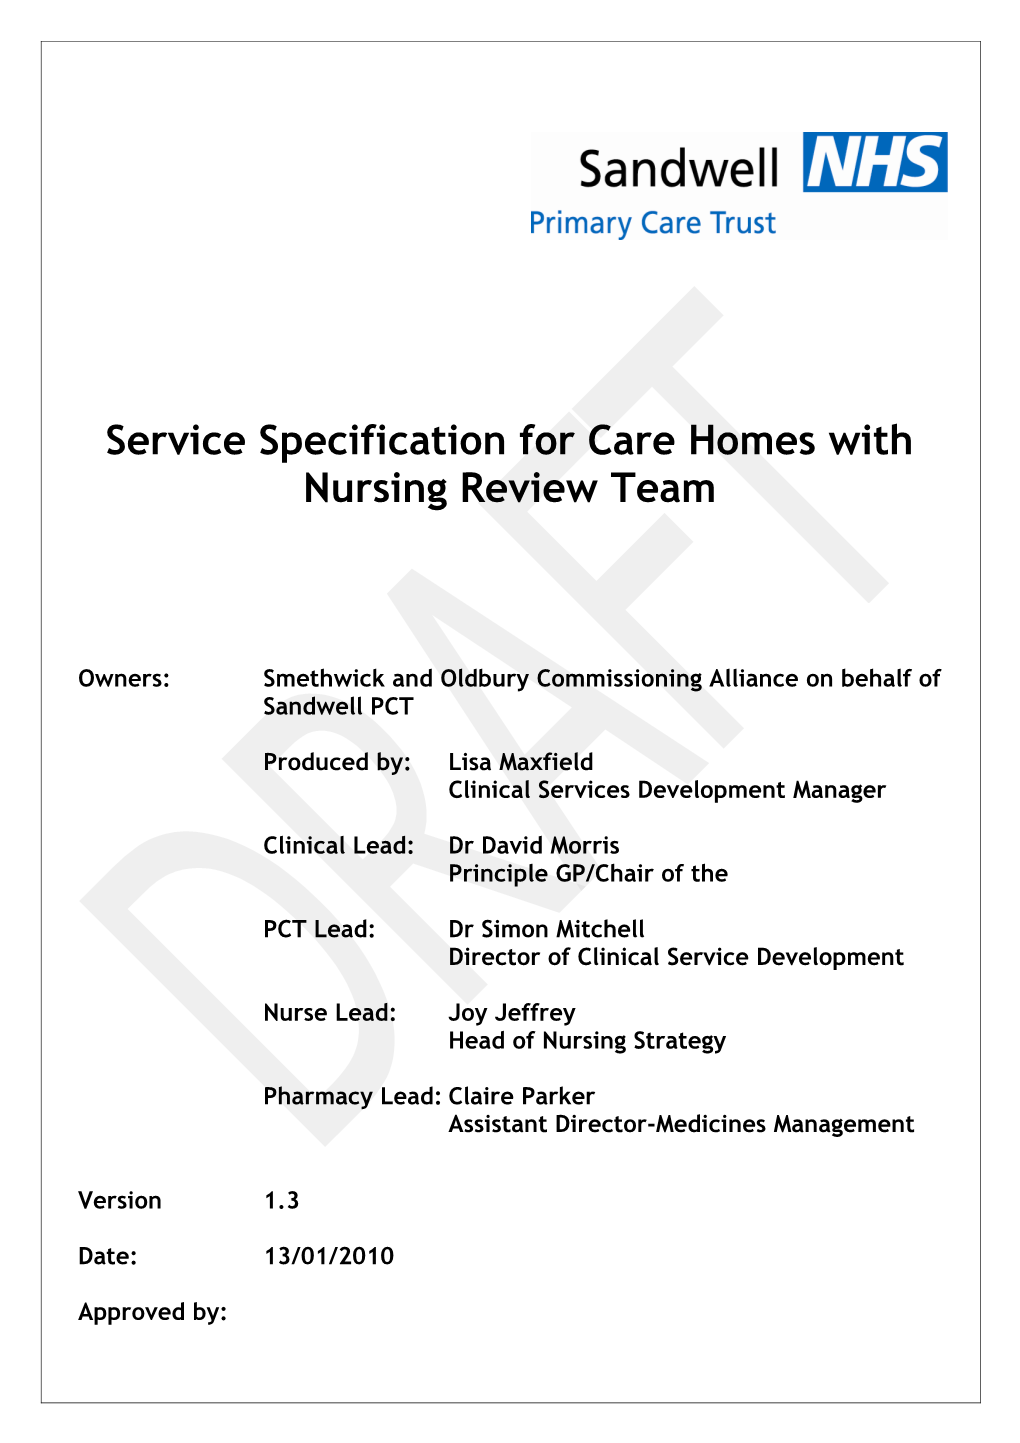 Service Specification for Care Homes with Nursing Review Team